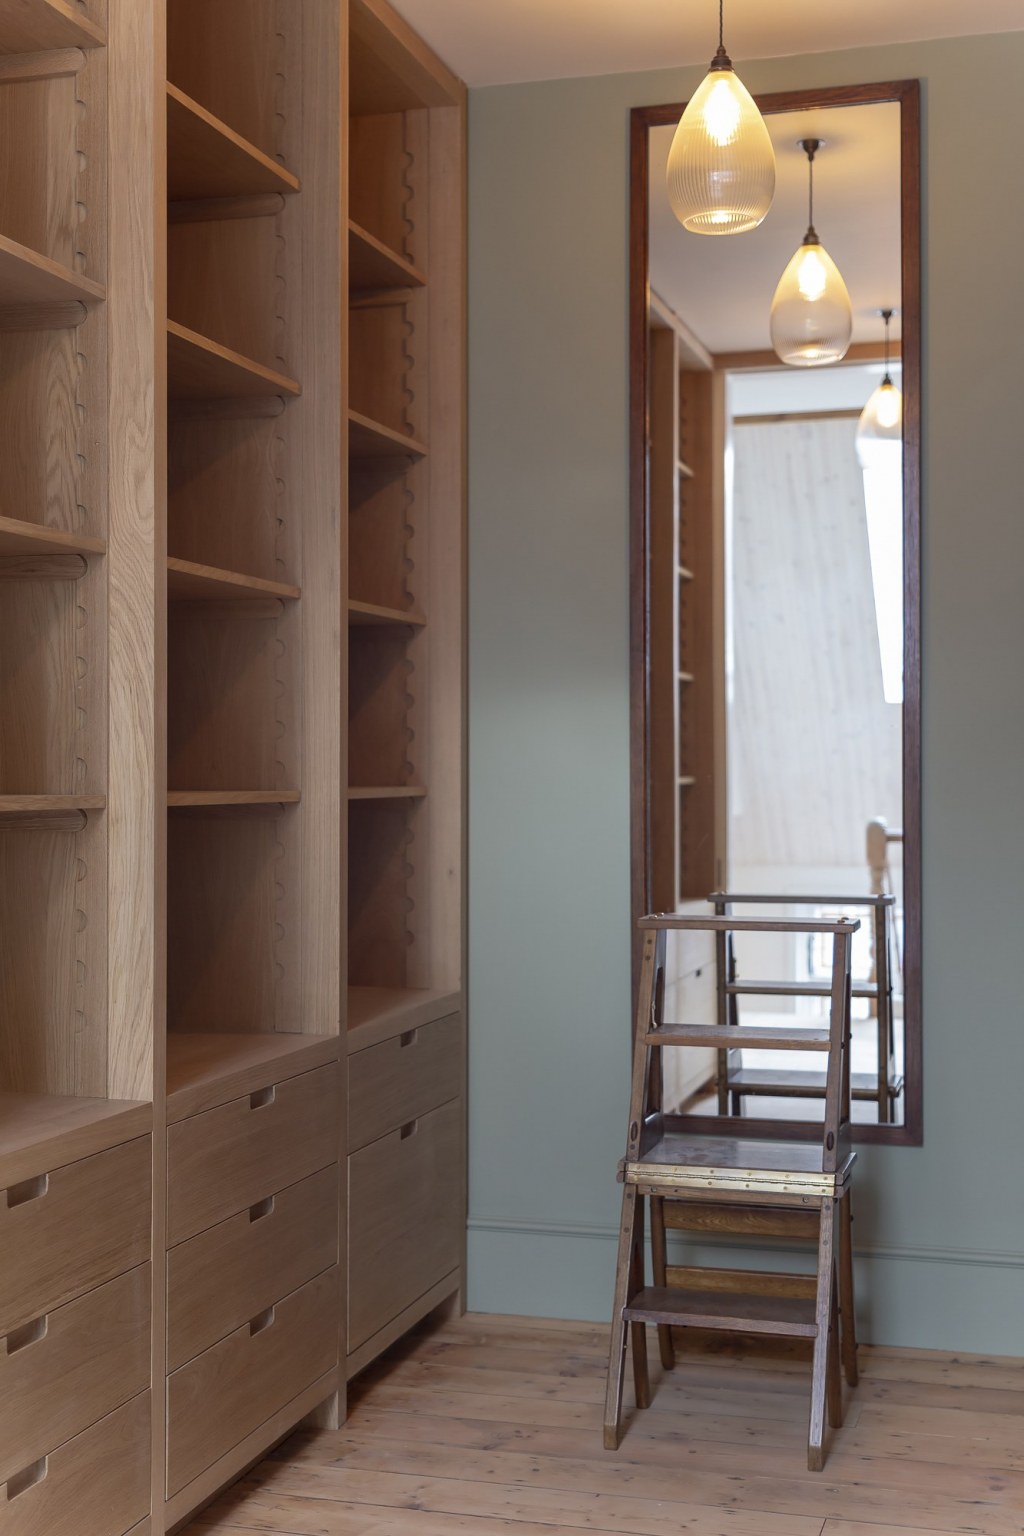 Muswell Hill / Dresser - image credit Mary Gaudin, photographer